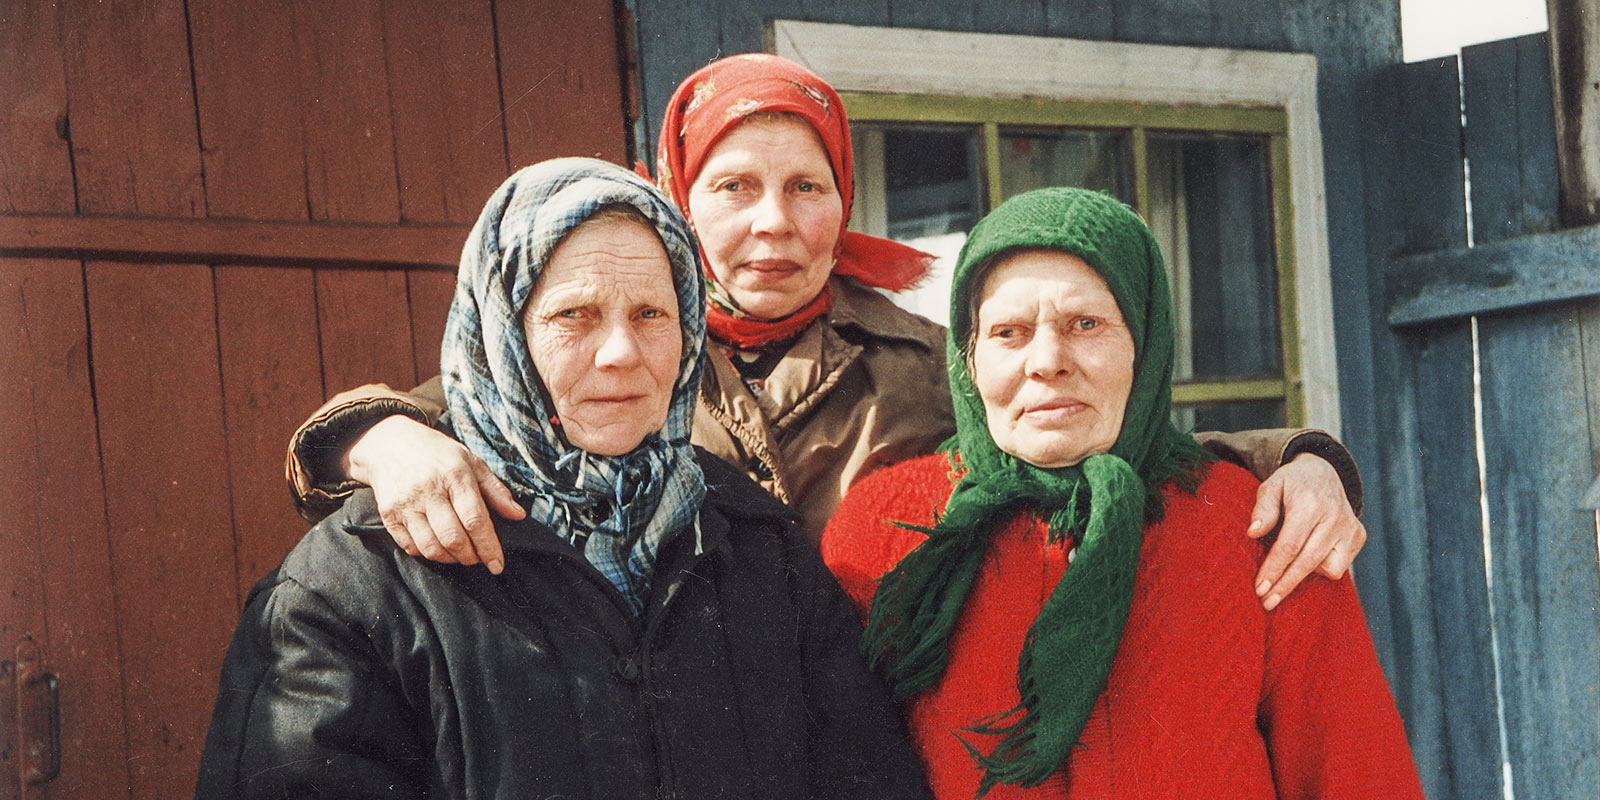 The three sisters from Estonka – Kamilla Vuks, Pauliine Talvik, and Emmi Juhanson – were widely known in the area for their songs. Photo: A. Korb 1996.